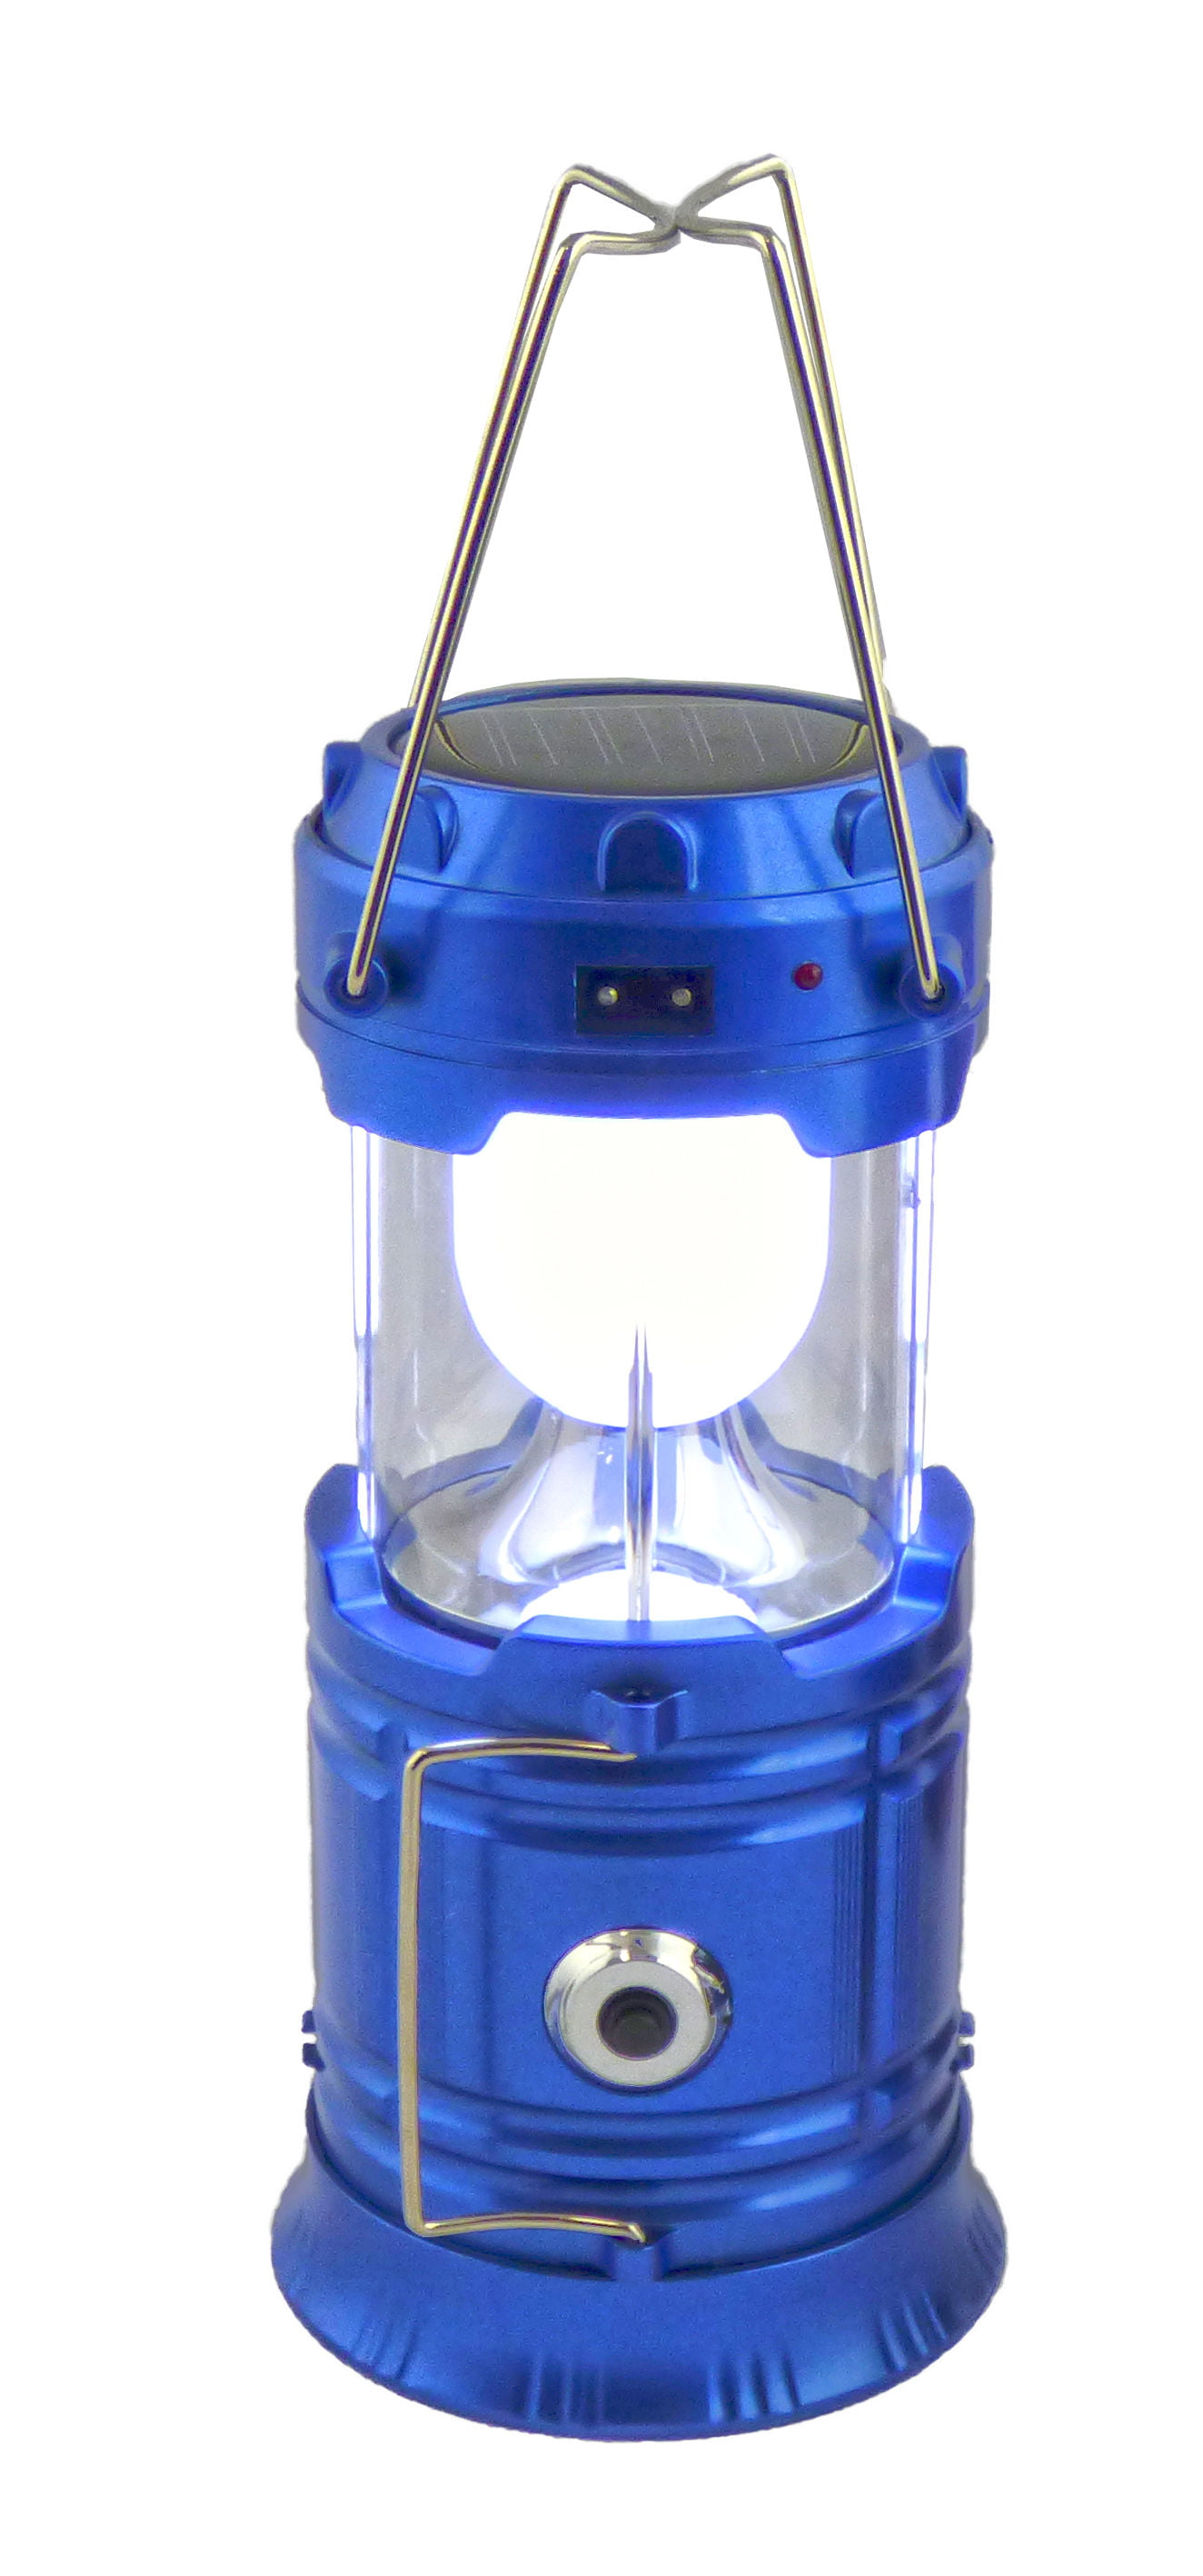 LED Solar Collapsible Camping Lantern Sunlit (1 Pack) - Battery Powered  Lamp Lanterns for Emergency, Power Outages, Hurricane – Portable Camp  Light, Flashlights, Accessories, Gear, 2 lighting methods 